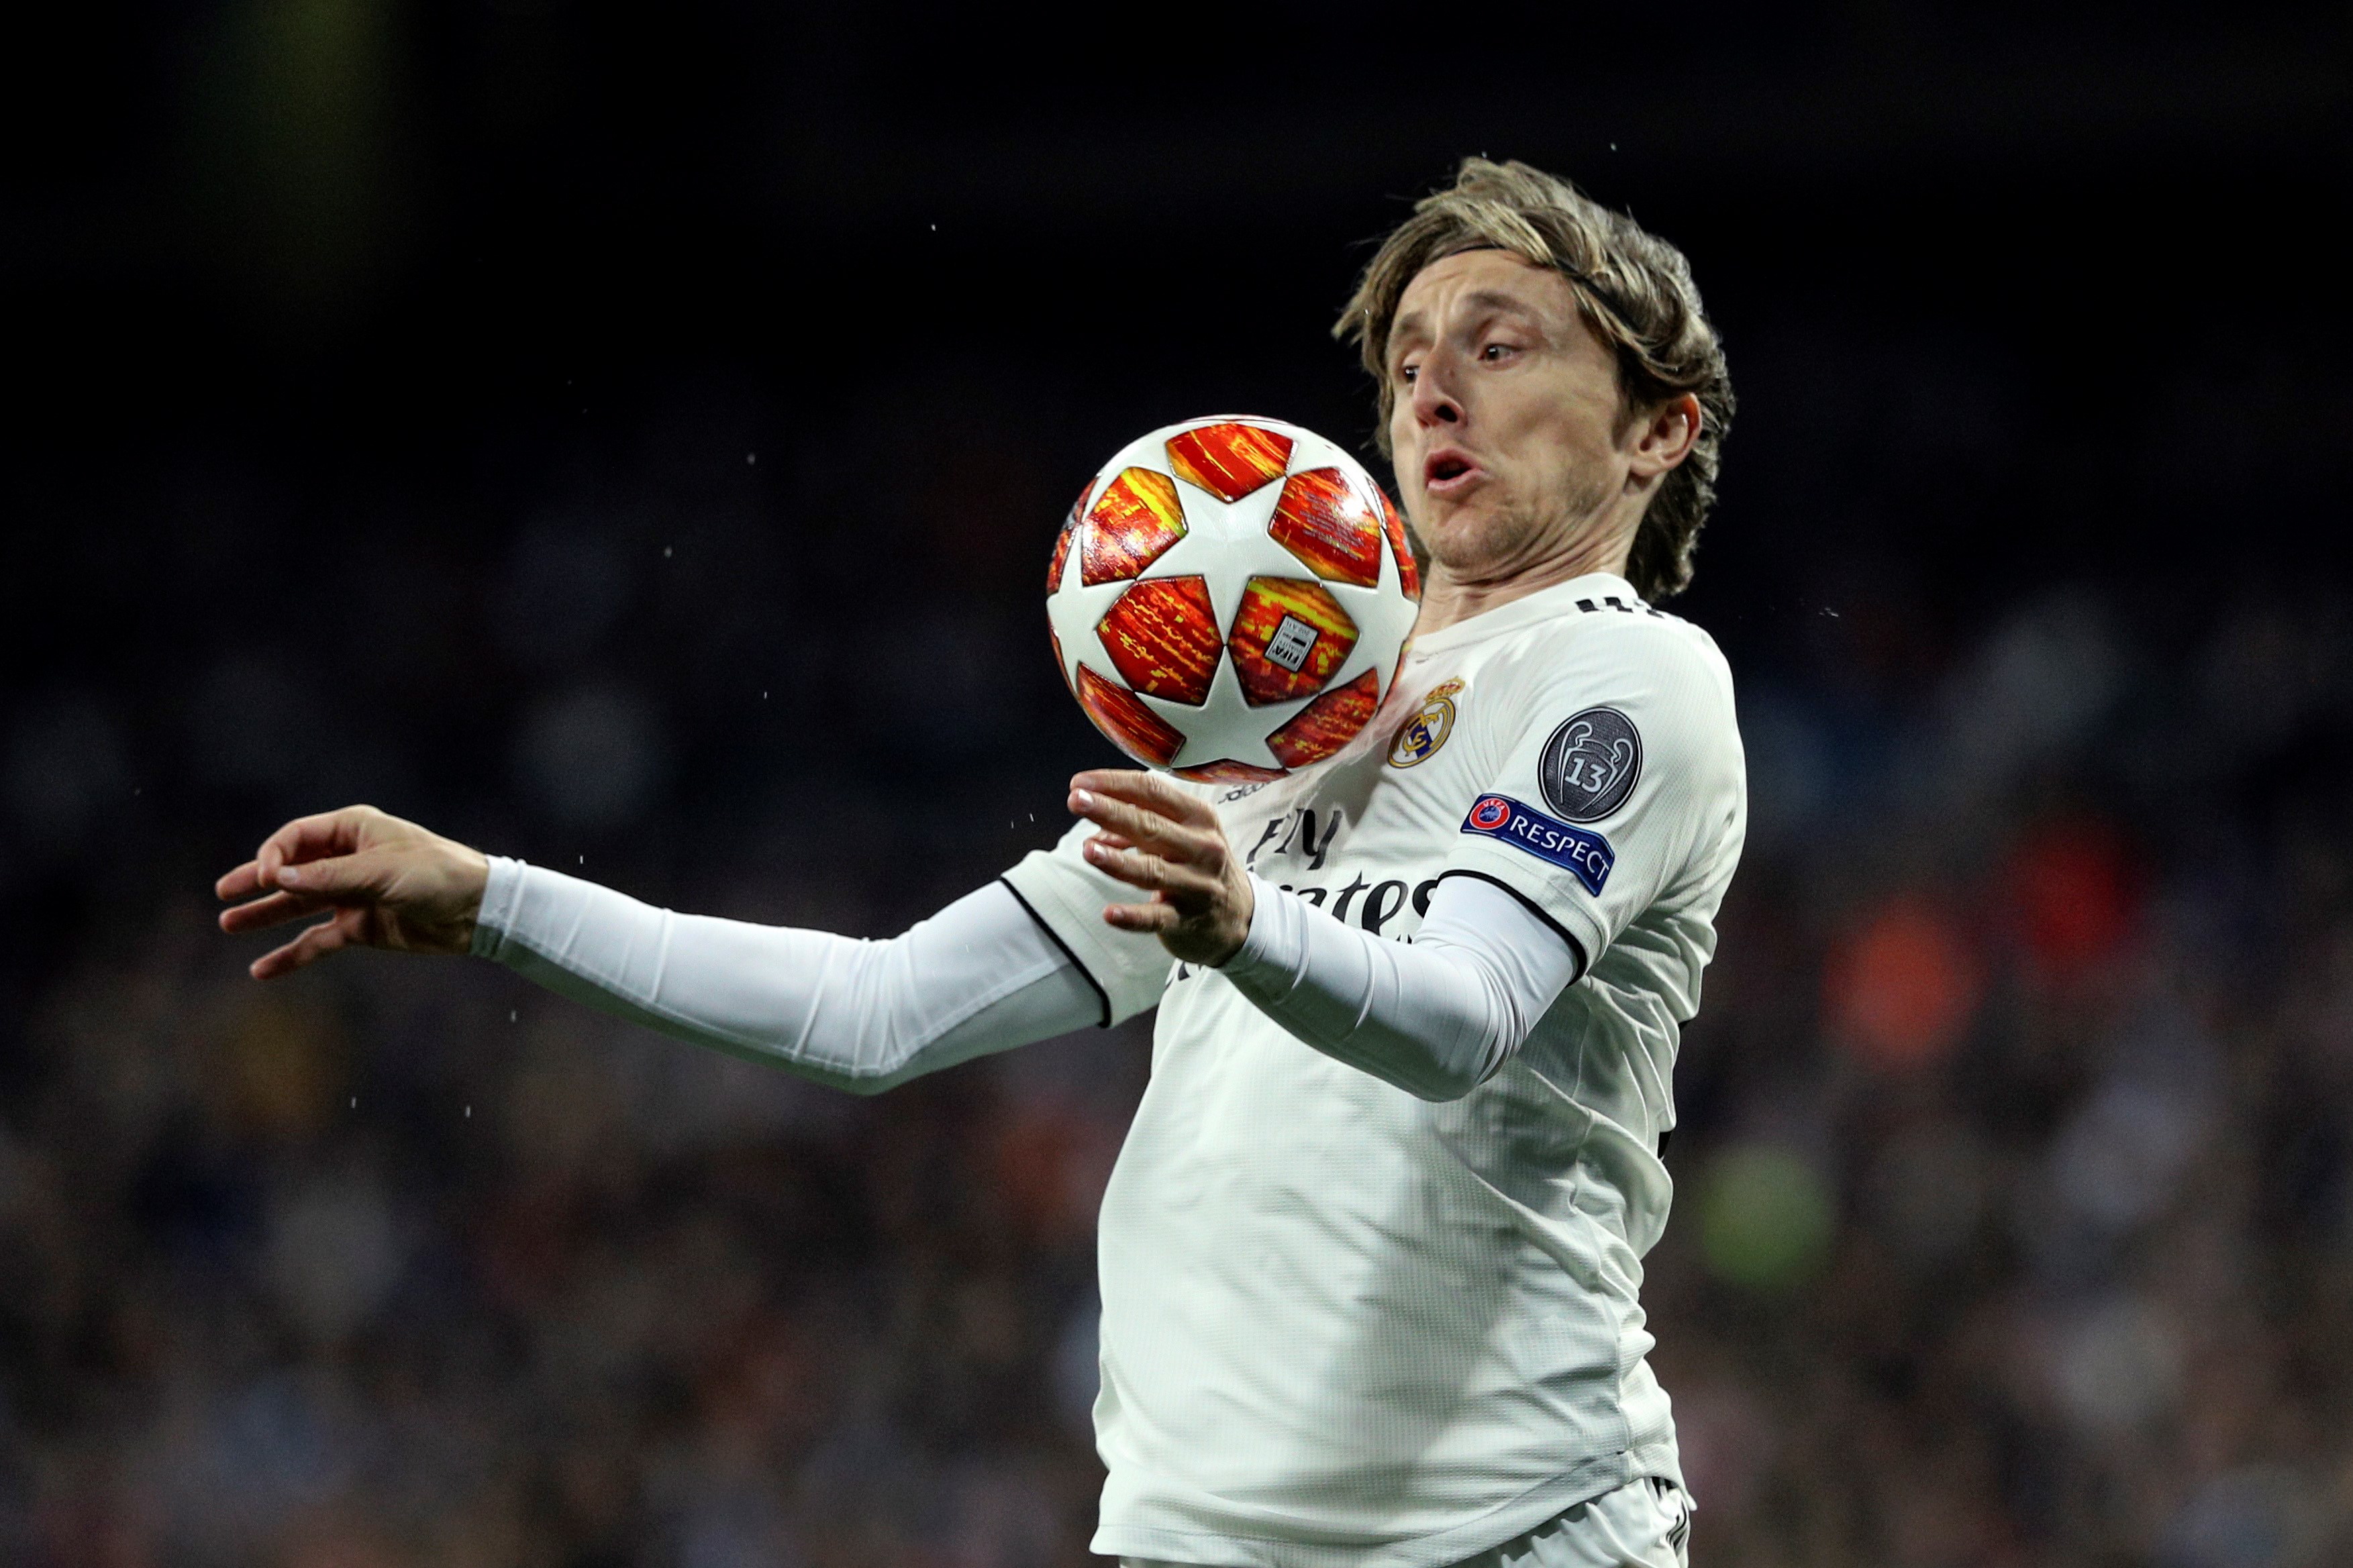 epa07415994 Real Madrid's Luka Modric in action during the UEFA Champions League round of 16 second leg match between Real Madrid and Ajax at the Santiago Bernabeu stadium in Madrid, Spain, 05 March 2019.  EPA/RODRIGO JIMENEZ